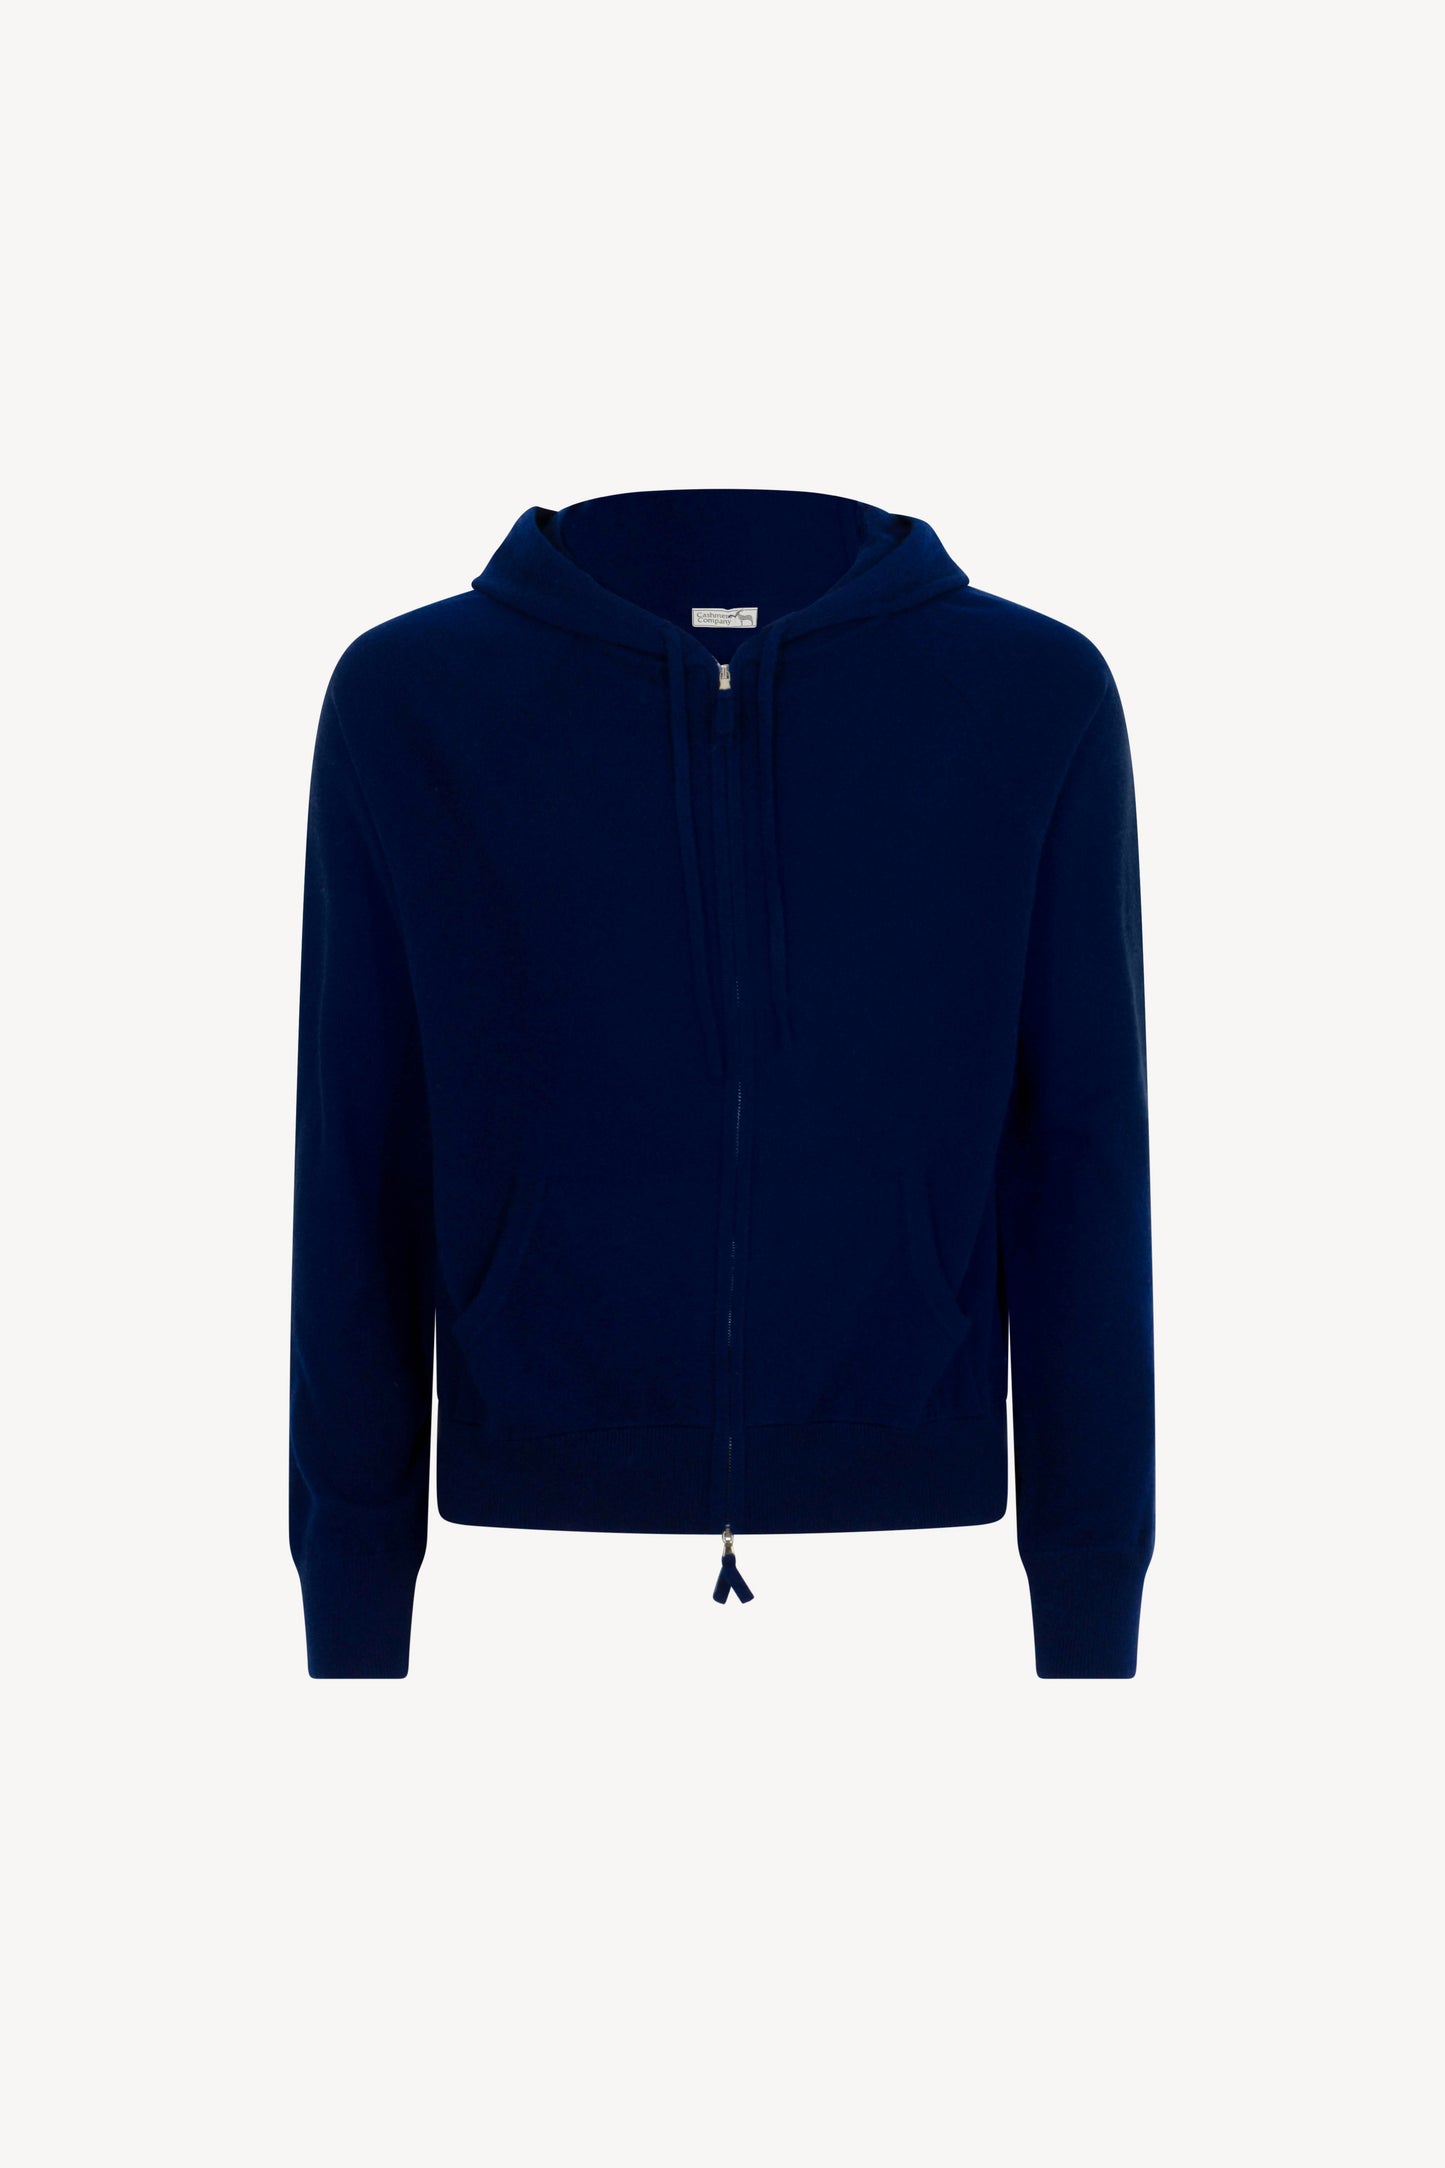 Pure Cashmere Men's Hooded Bomber Jacket